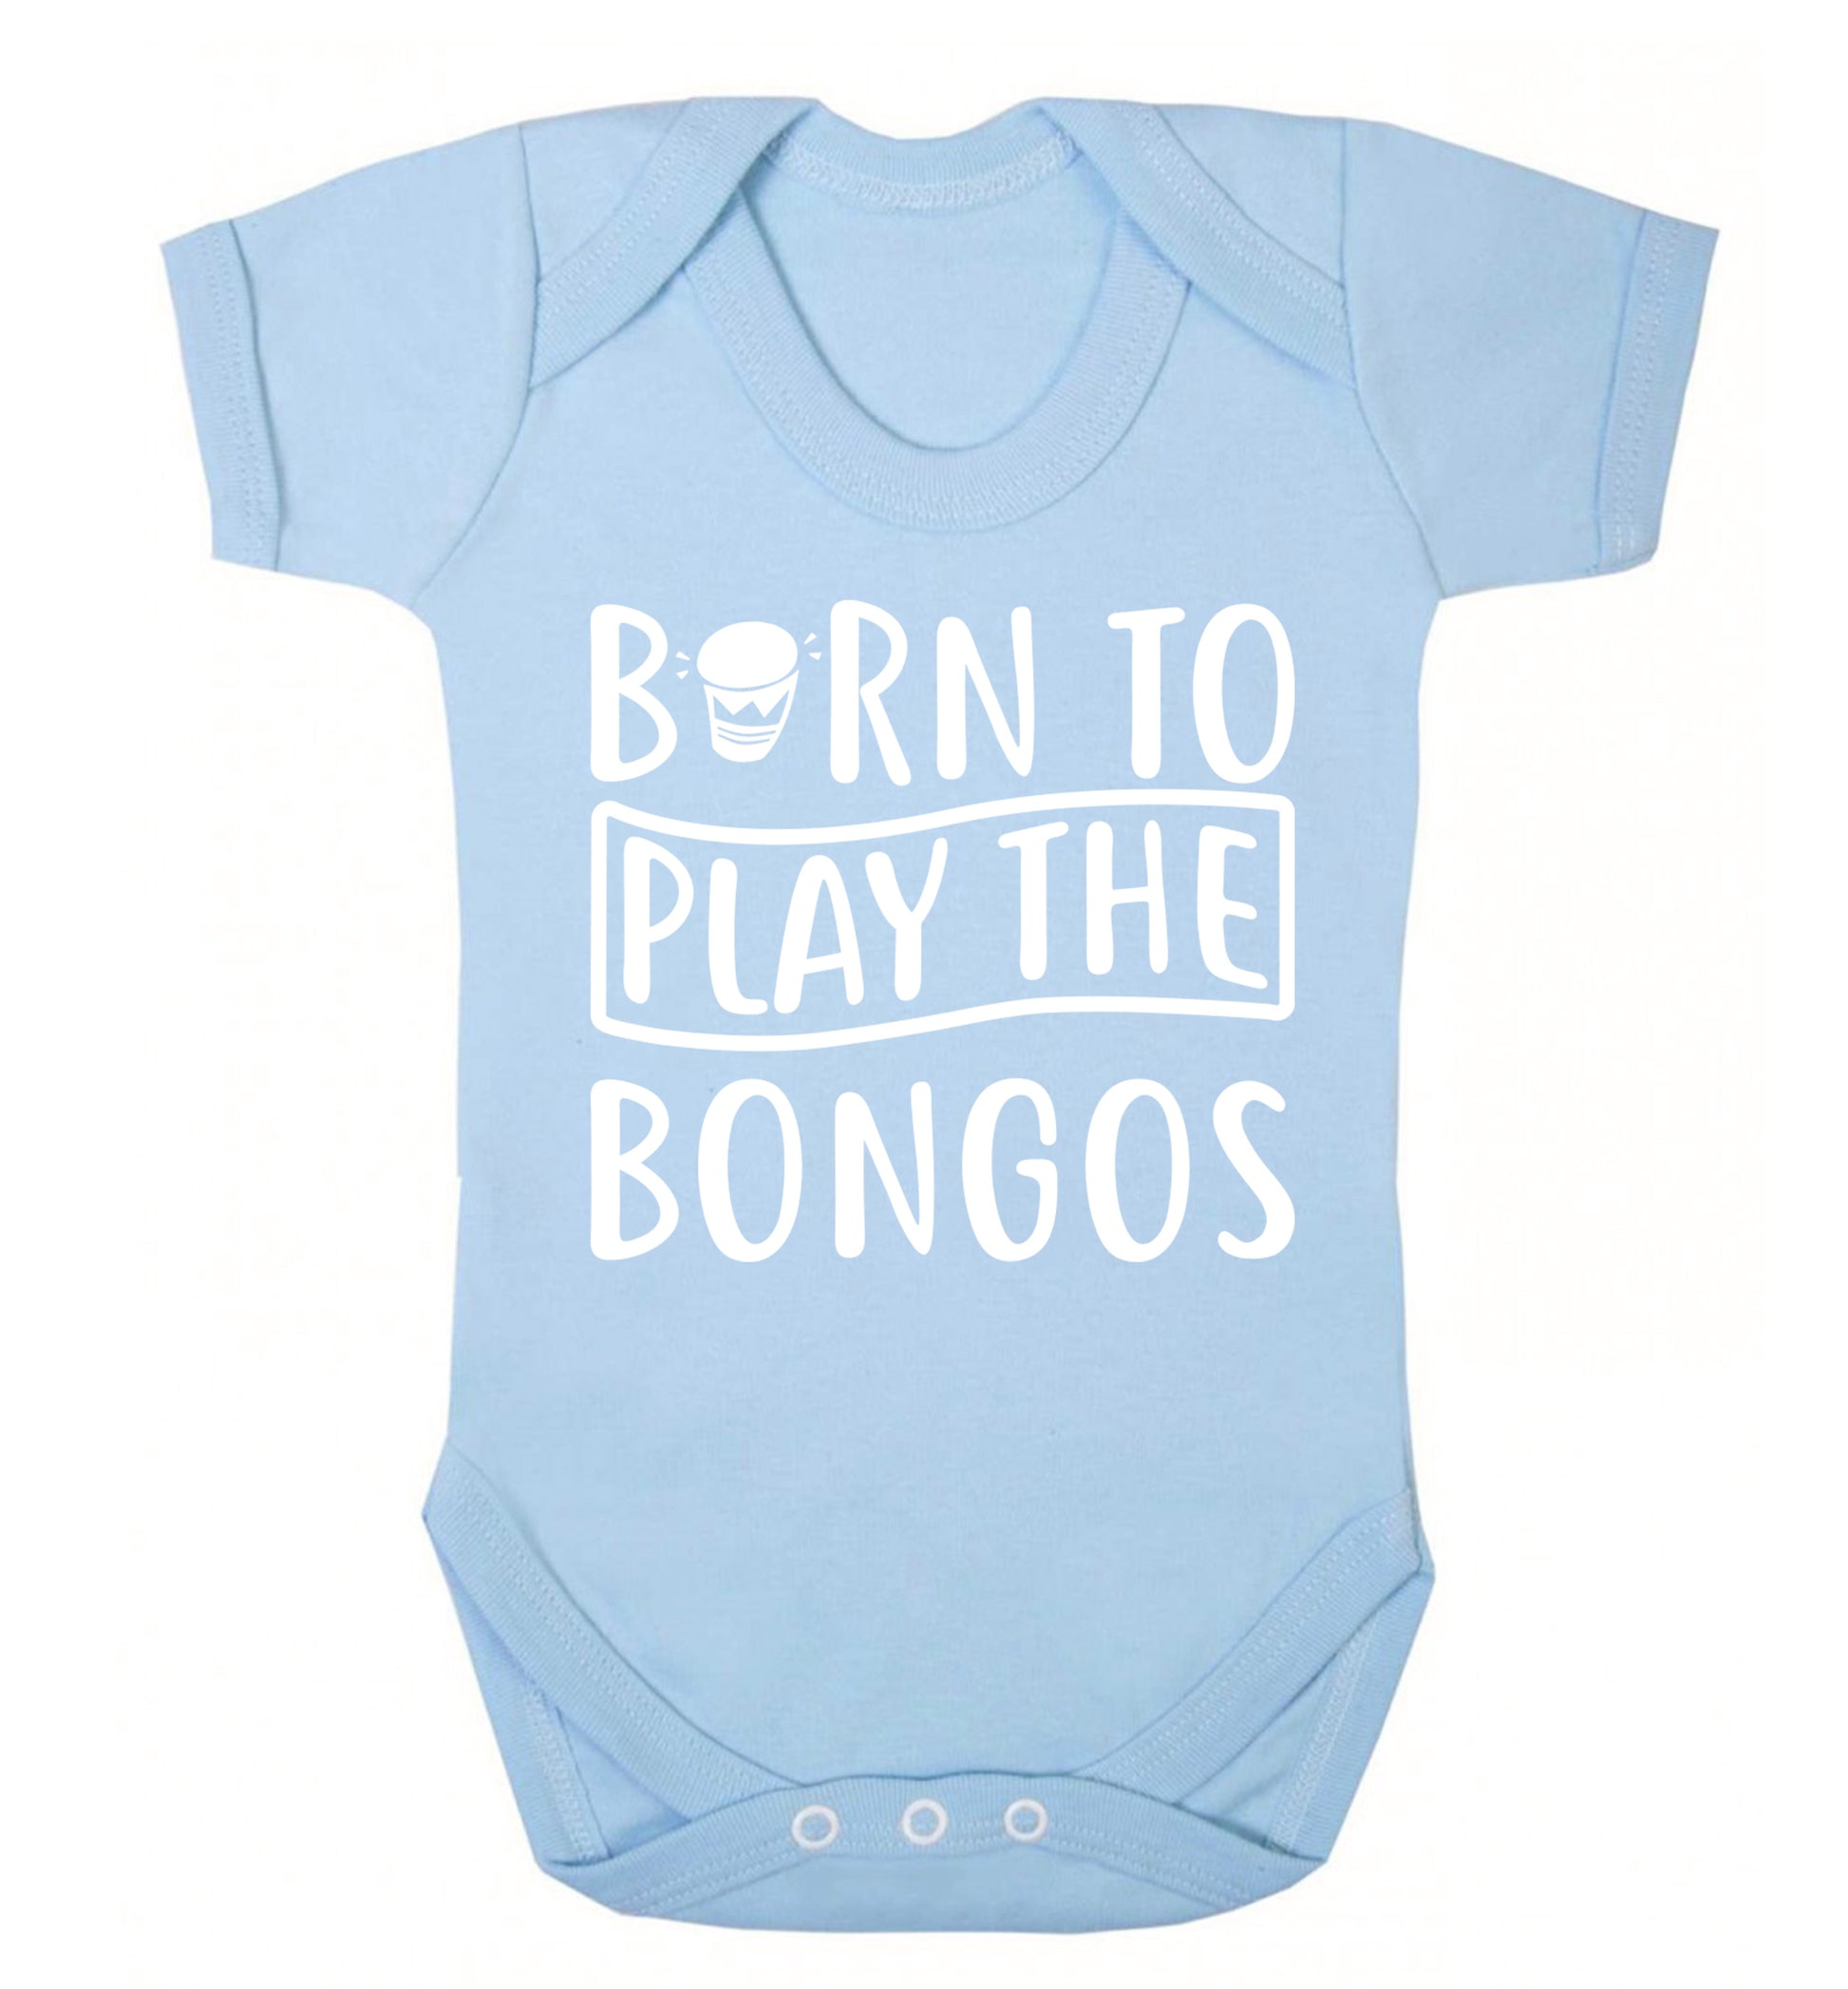 Born to play the bongos Baby Vest pale blue 18-24 months